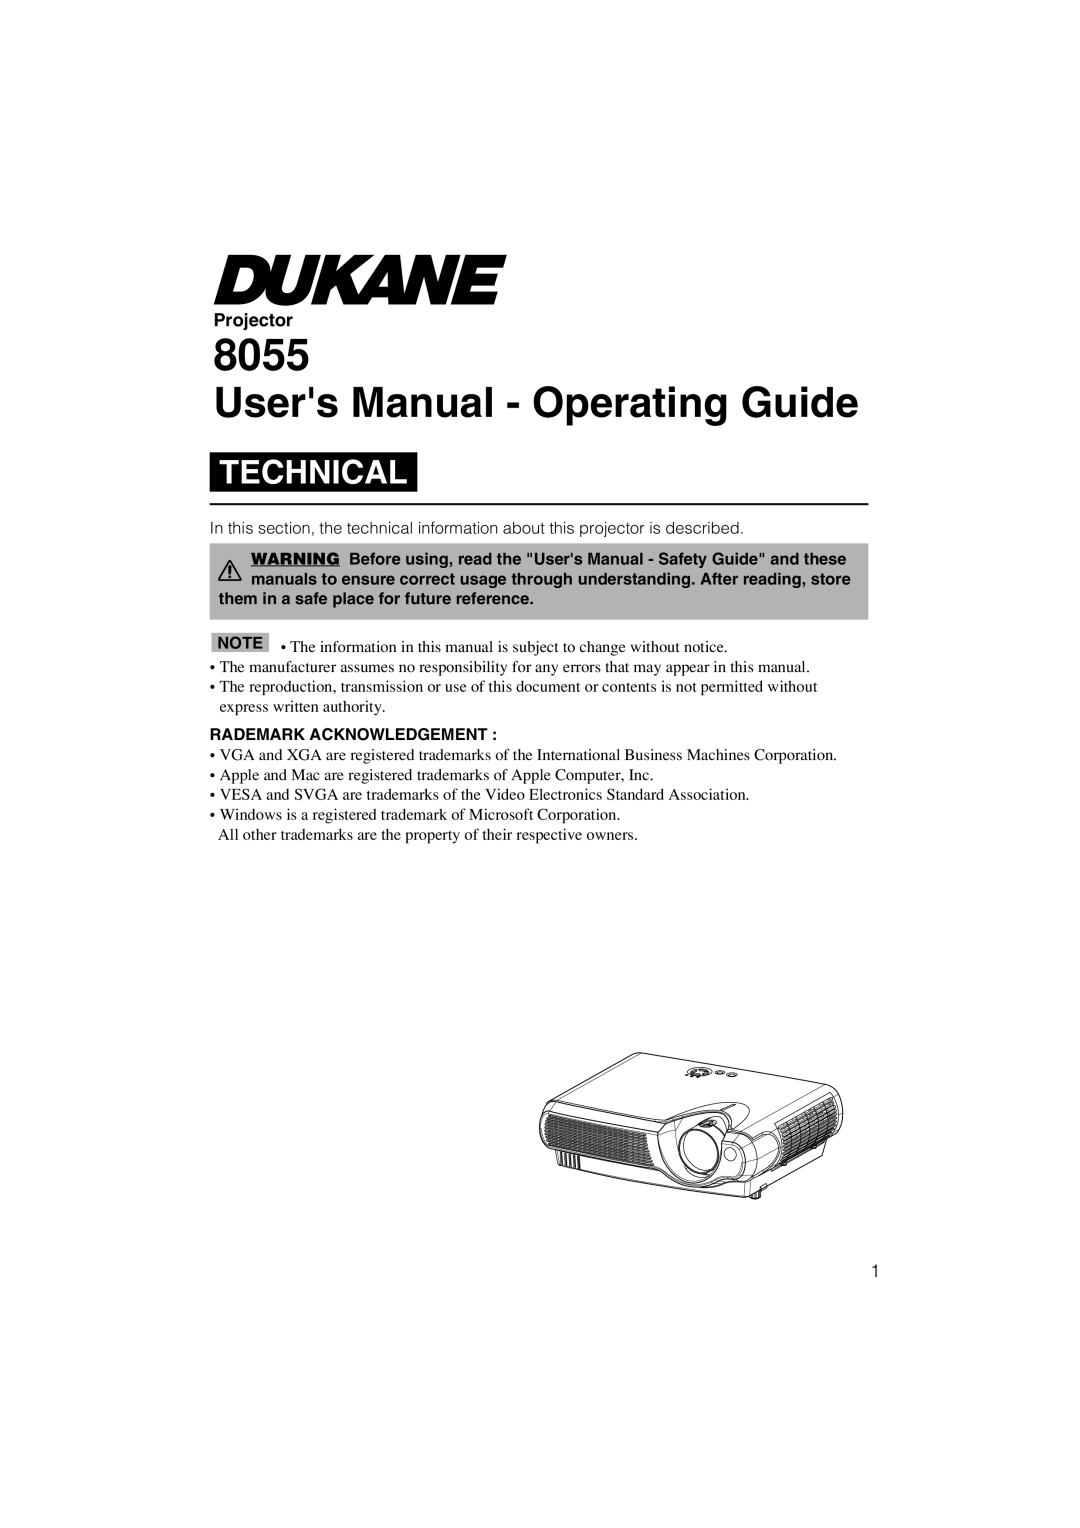 Dukane 8055 user manual Users Manual - Operating Guide, Technical, Projector, them in a safe place for future reference 